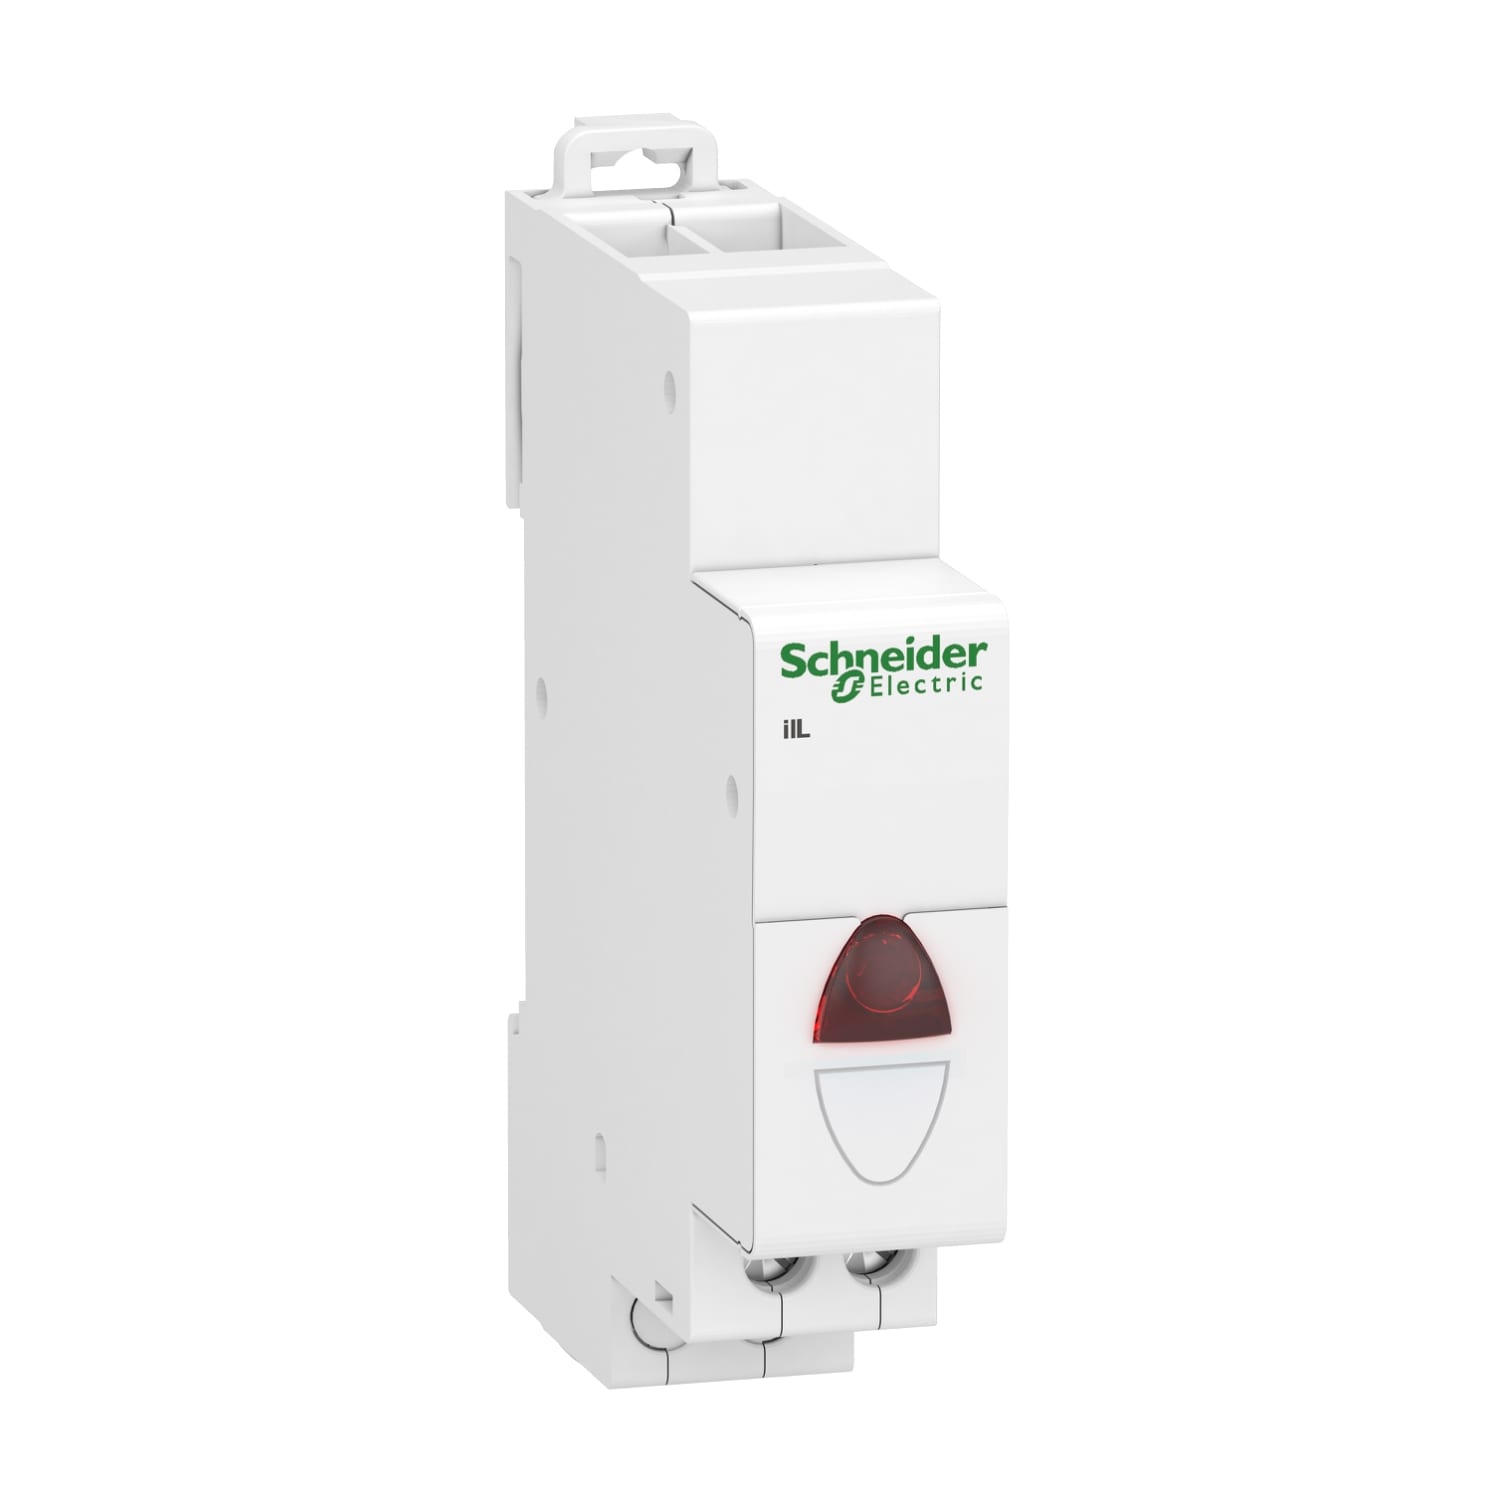 Schneider Electric - Acti9, iIL voyant lumineux simple rouge 12...48VCA-CC